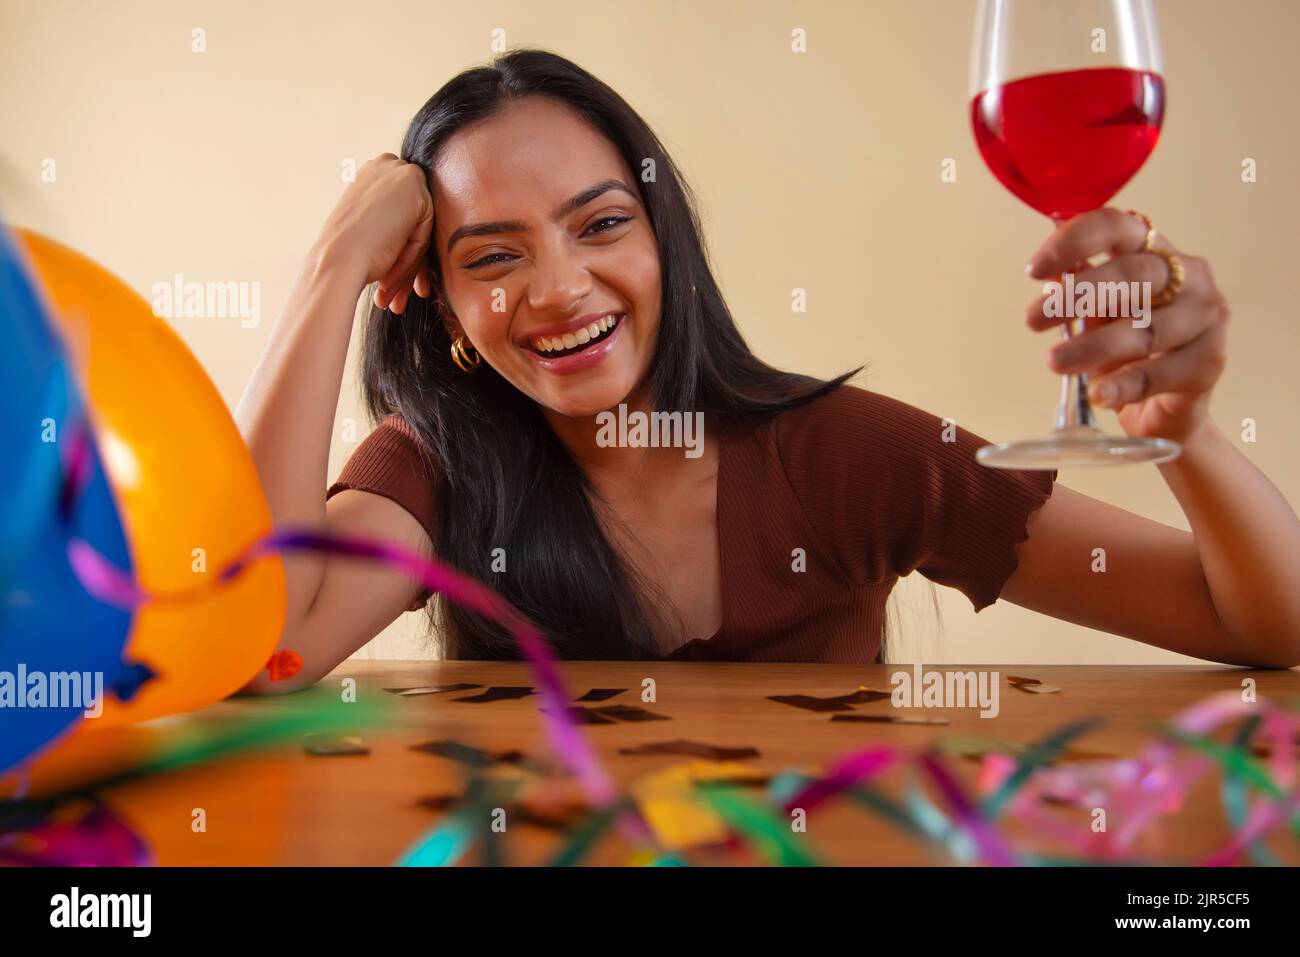 Portrait of young woman celebrating with a glass of wine Stock Photo